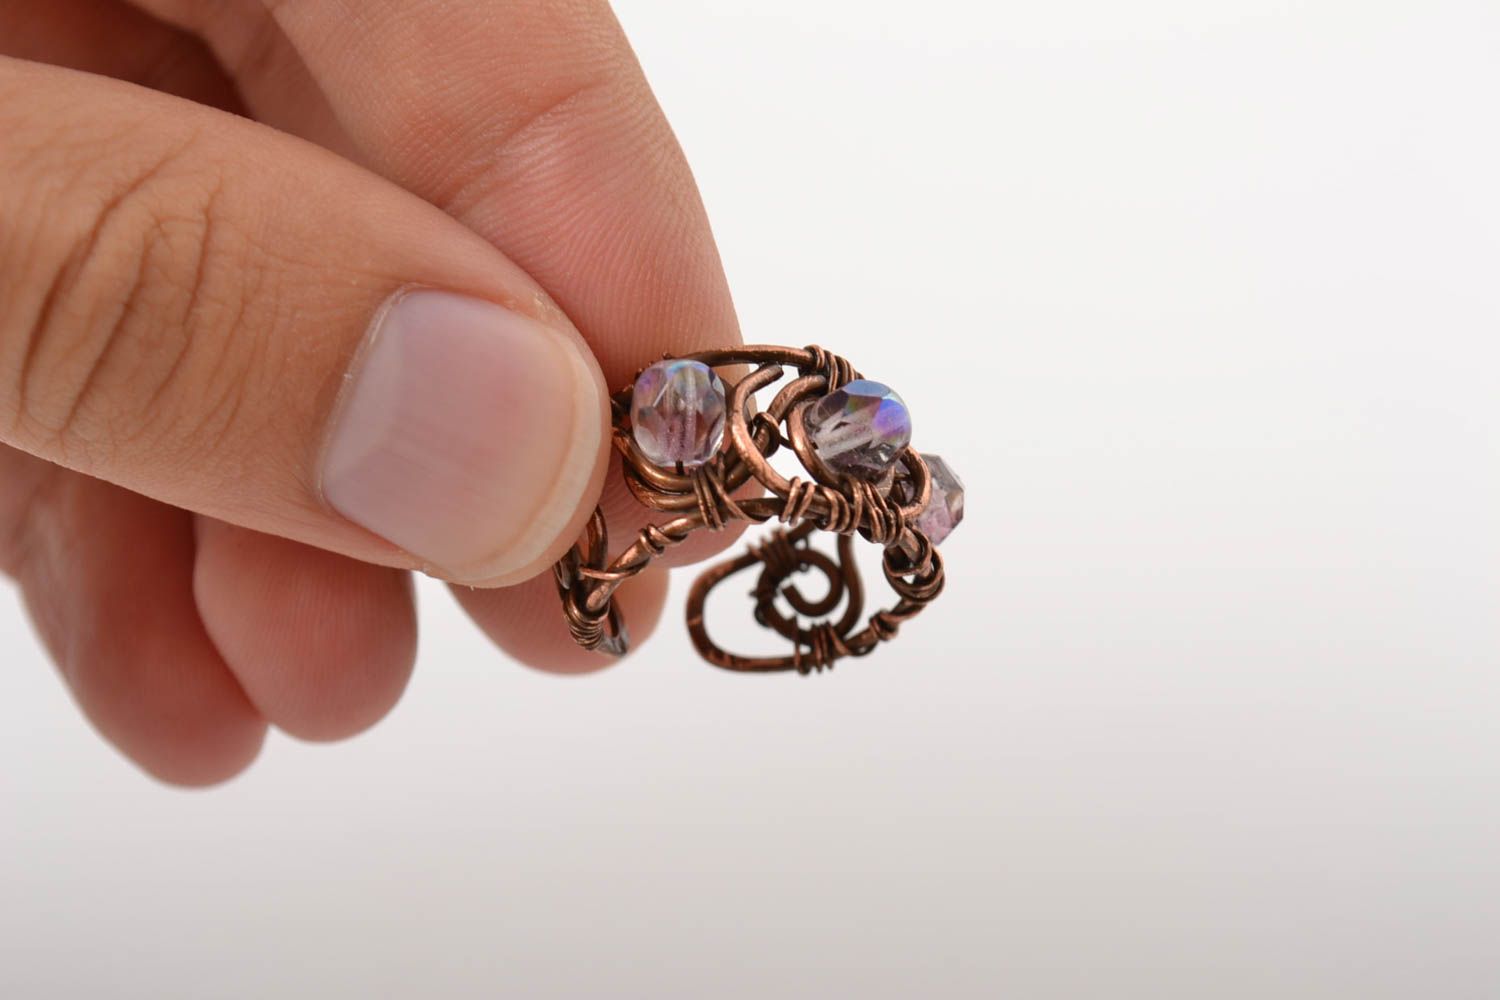 Handmade ring designer accessories unusual gift for her copper jewelry photo 4